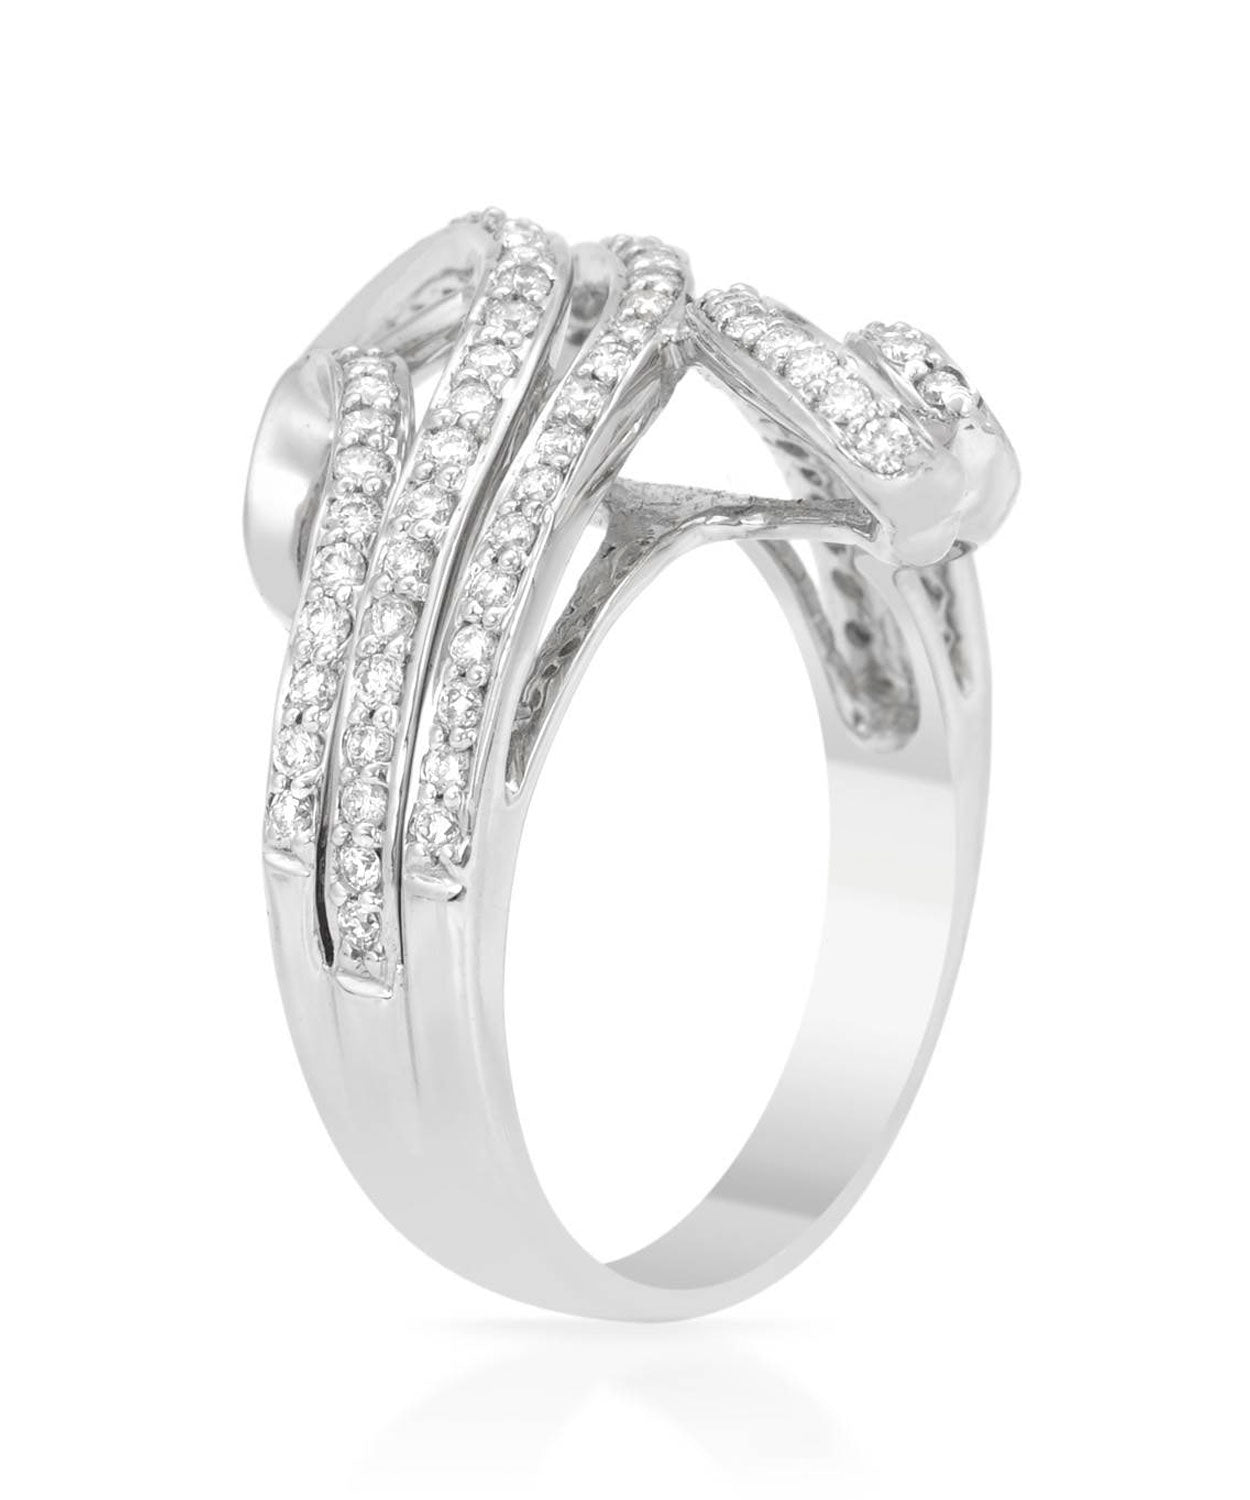 Signature Collection 0.70 ctw Diamond 18k White Gold Fashion Right Hand Ring View 2